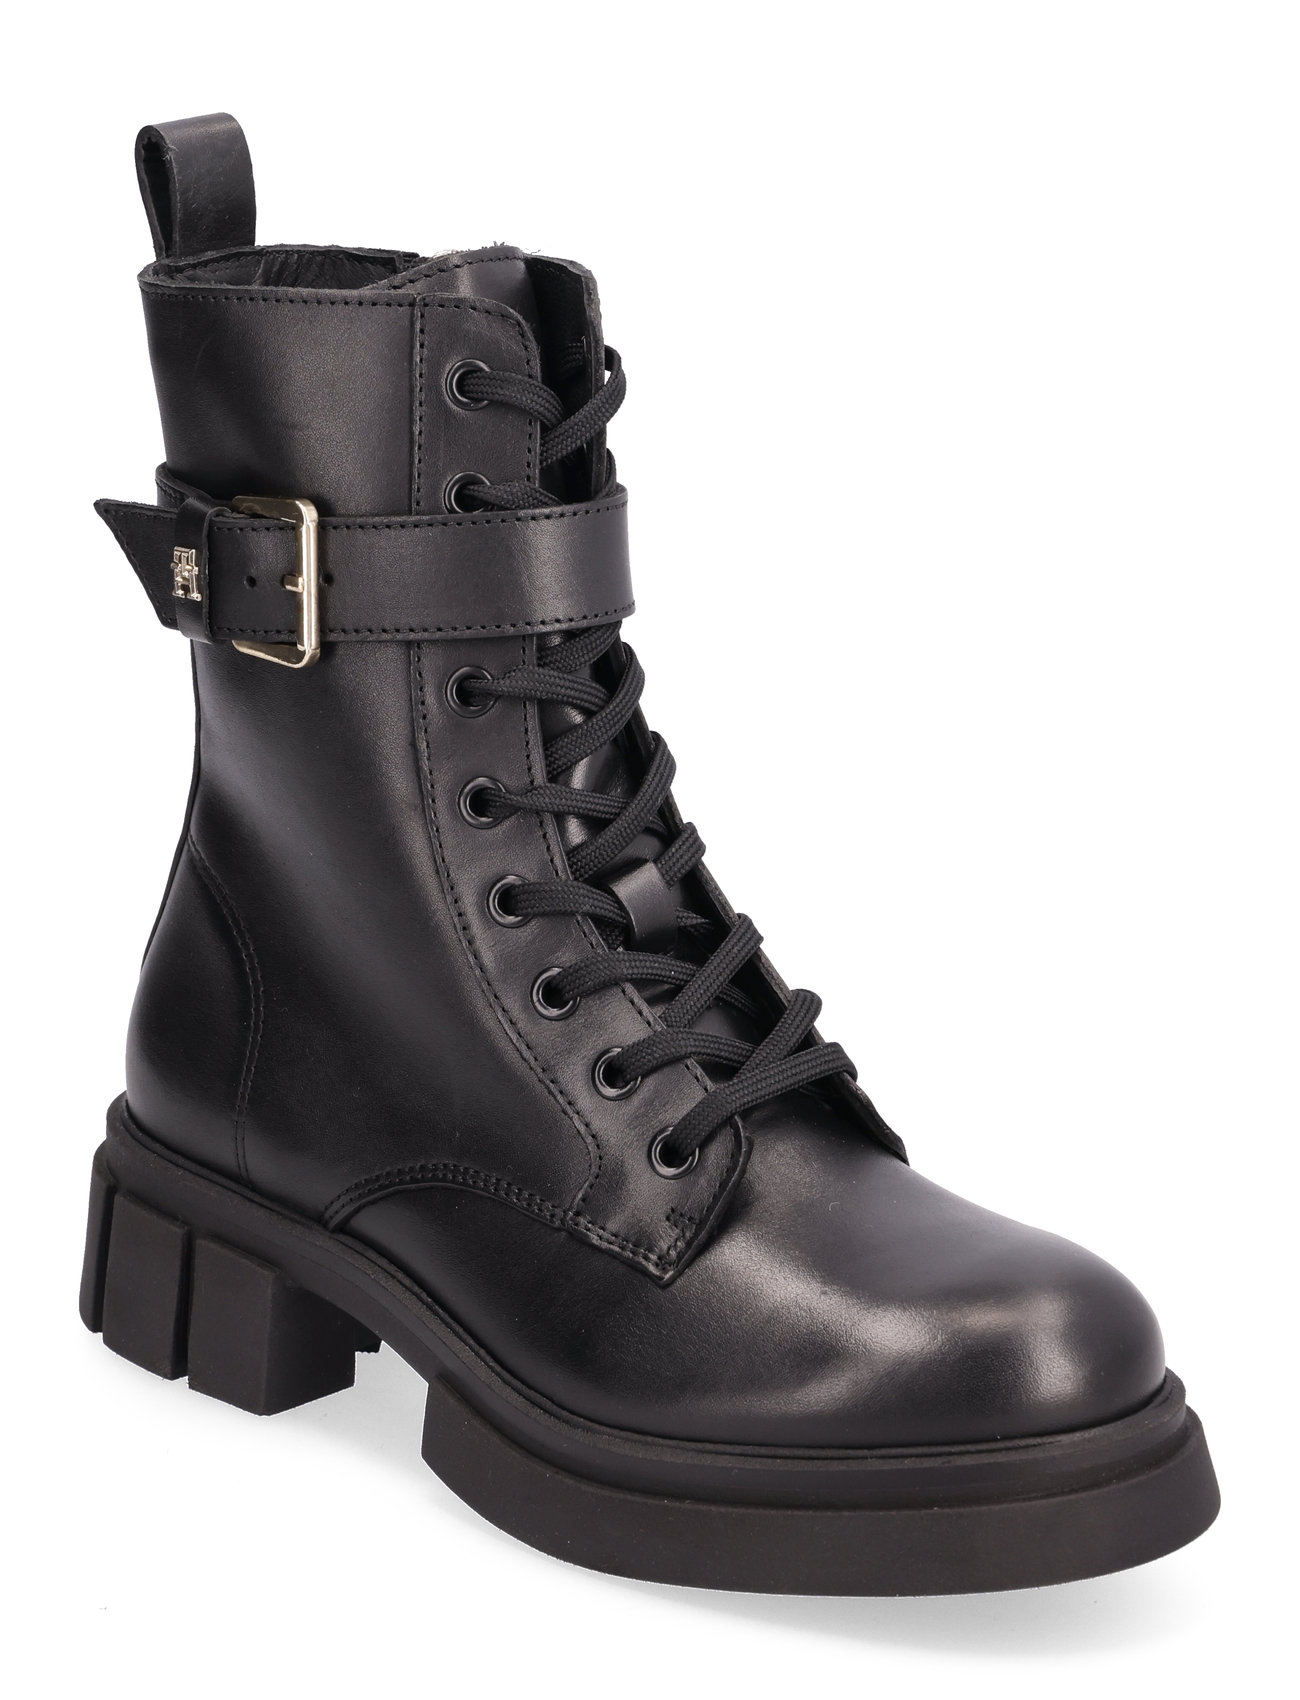 Cool Feminine Bikerboot Shoes Boots Ankle Boots Laced Boots Black Tommy Hilfiger